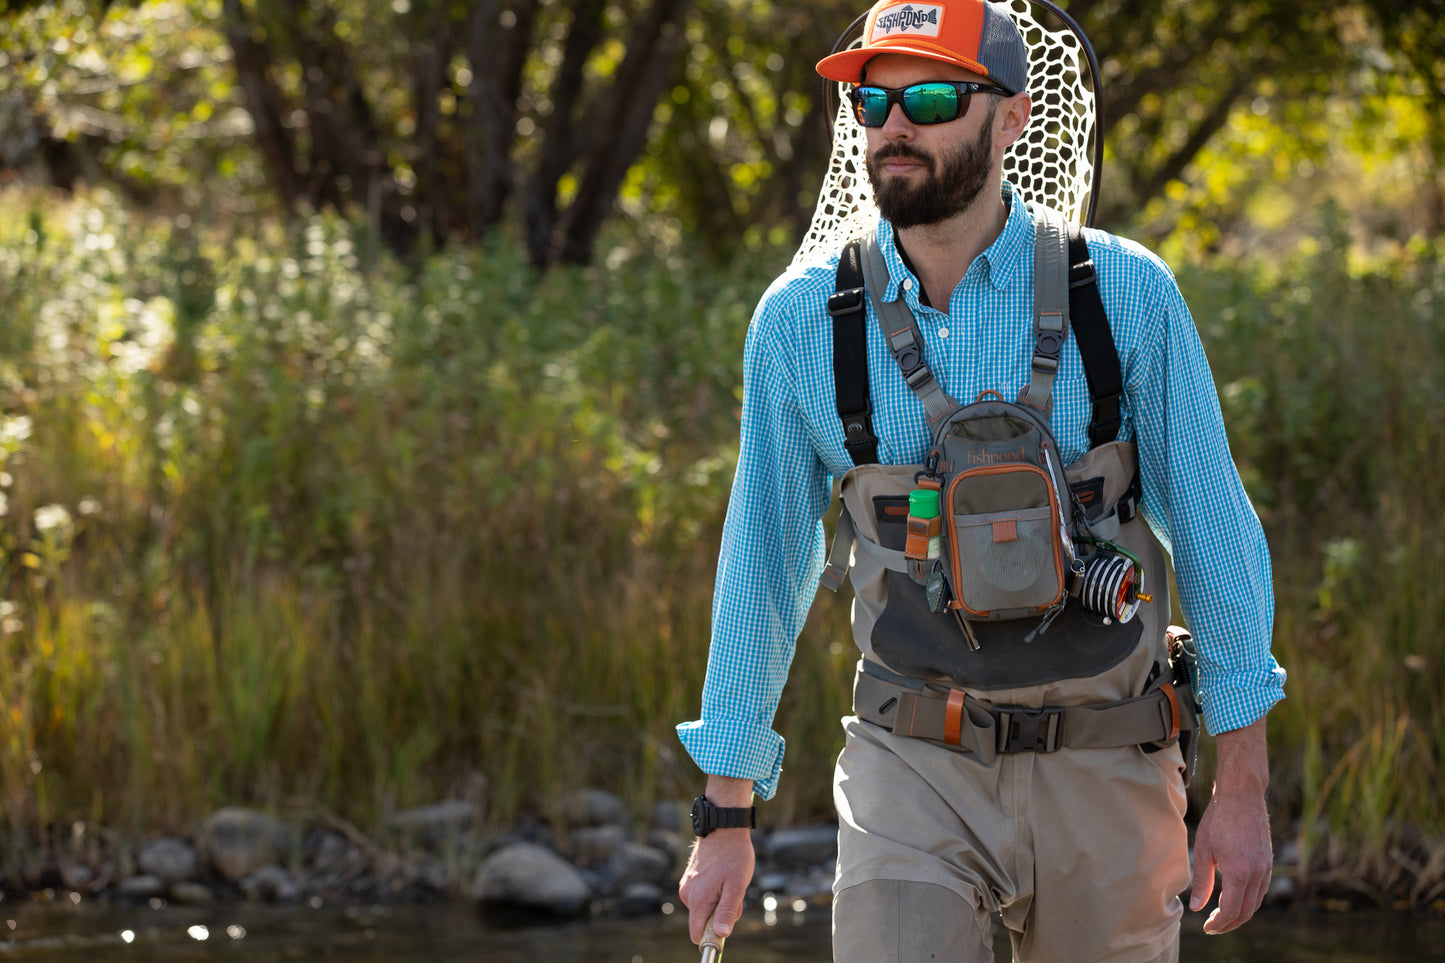 Fishpond Canyon Creek Chest Pack at The Fly Shop